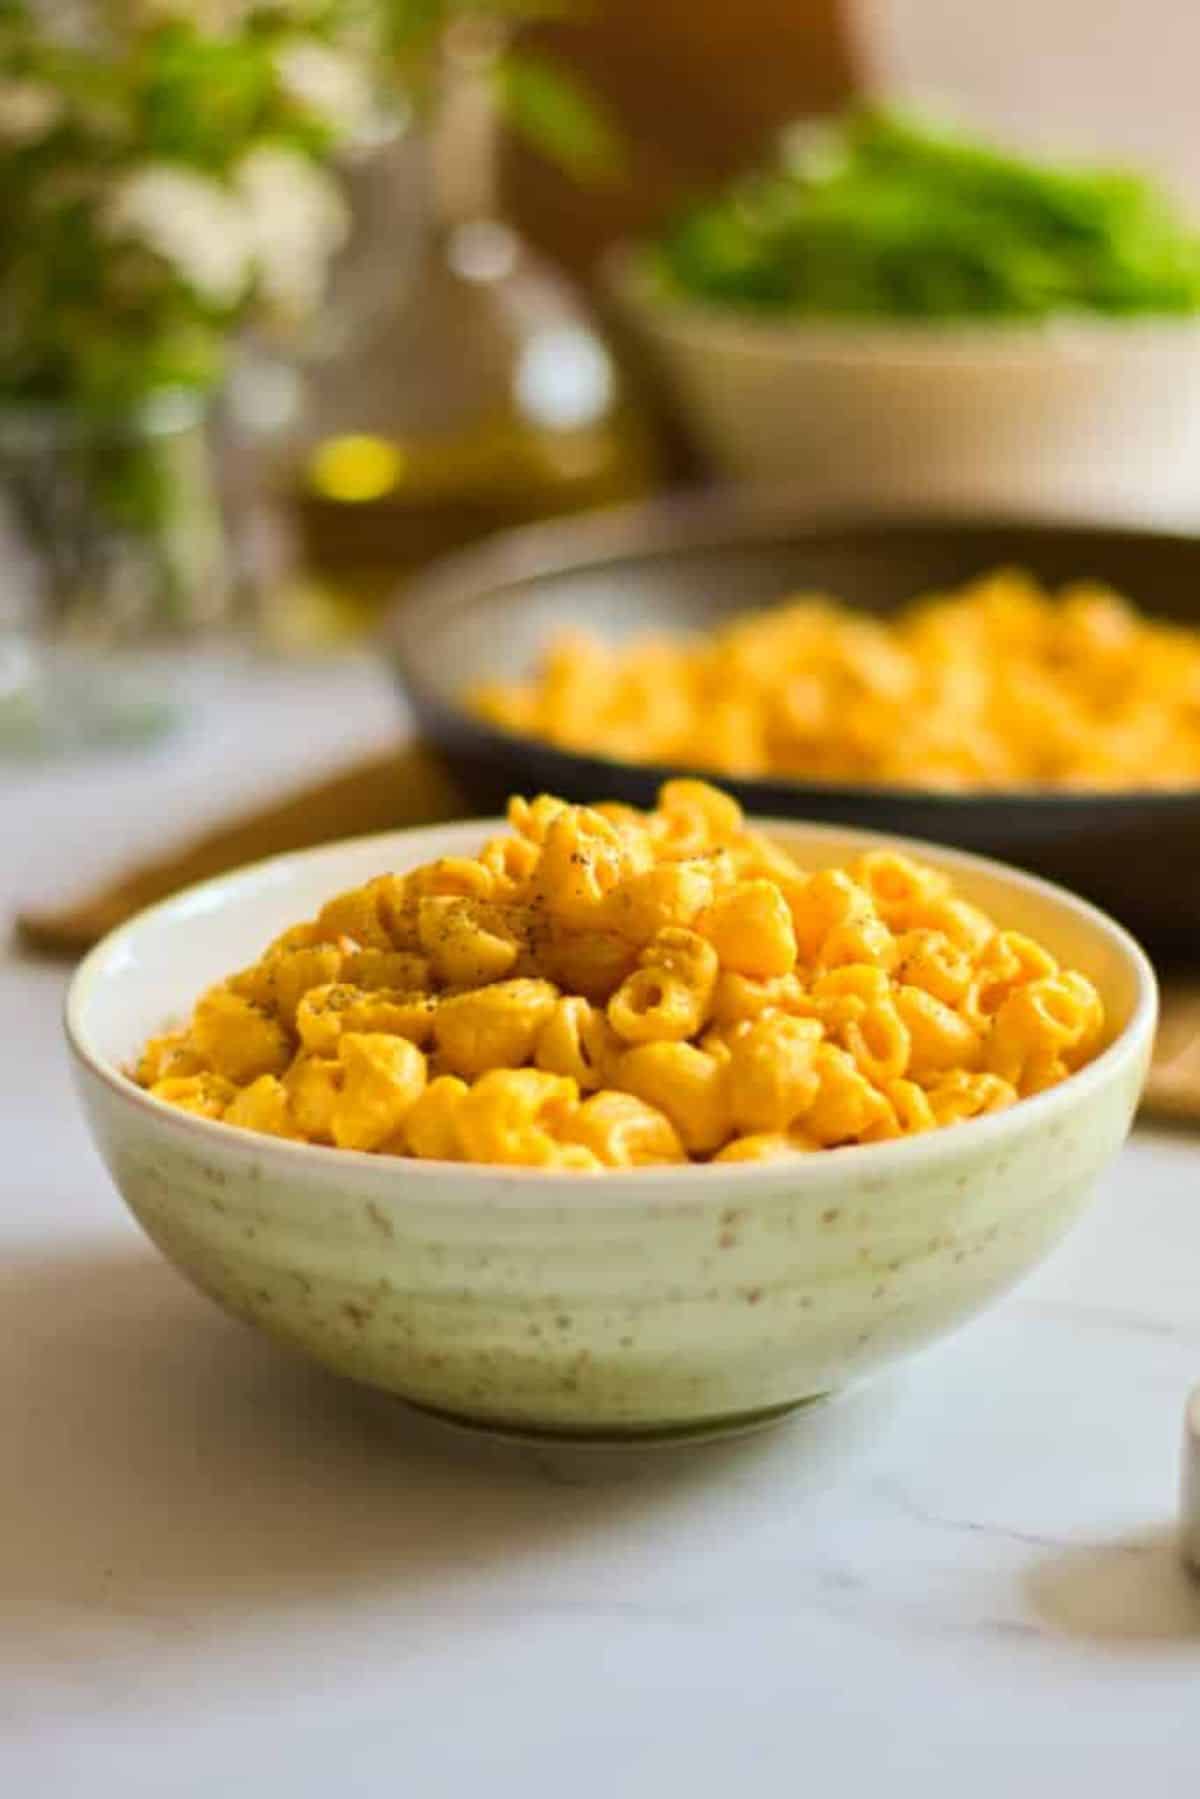 Delicious Gluten-Free Vegan Mac and Cheese Recipe with Potatoes and Carrots in a bowl.